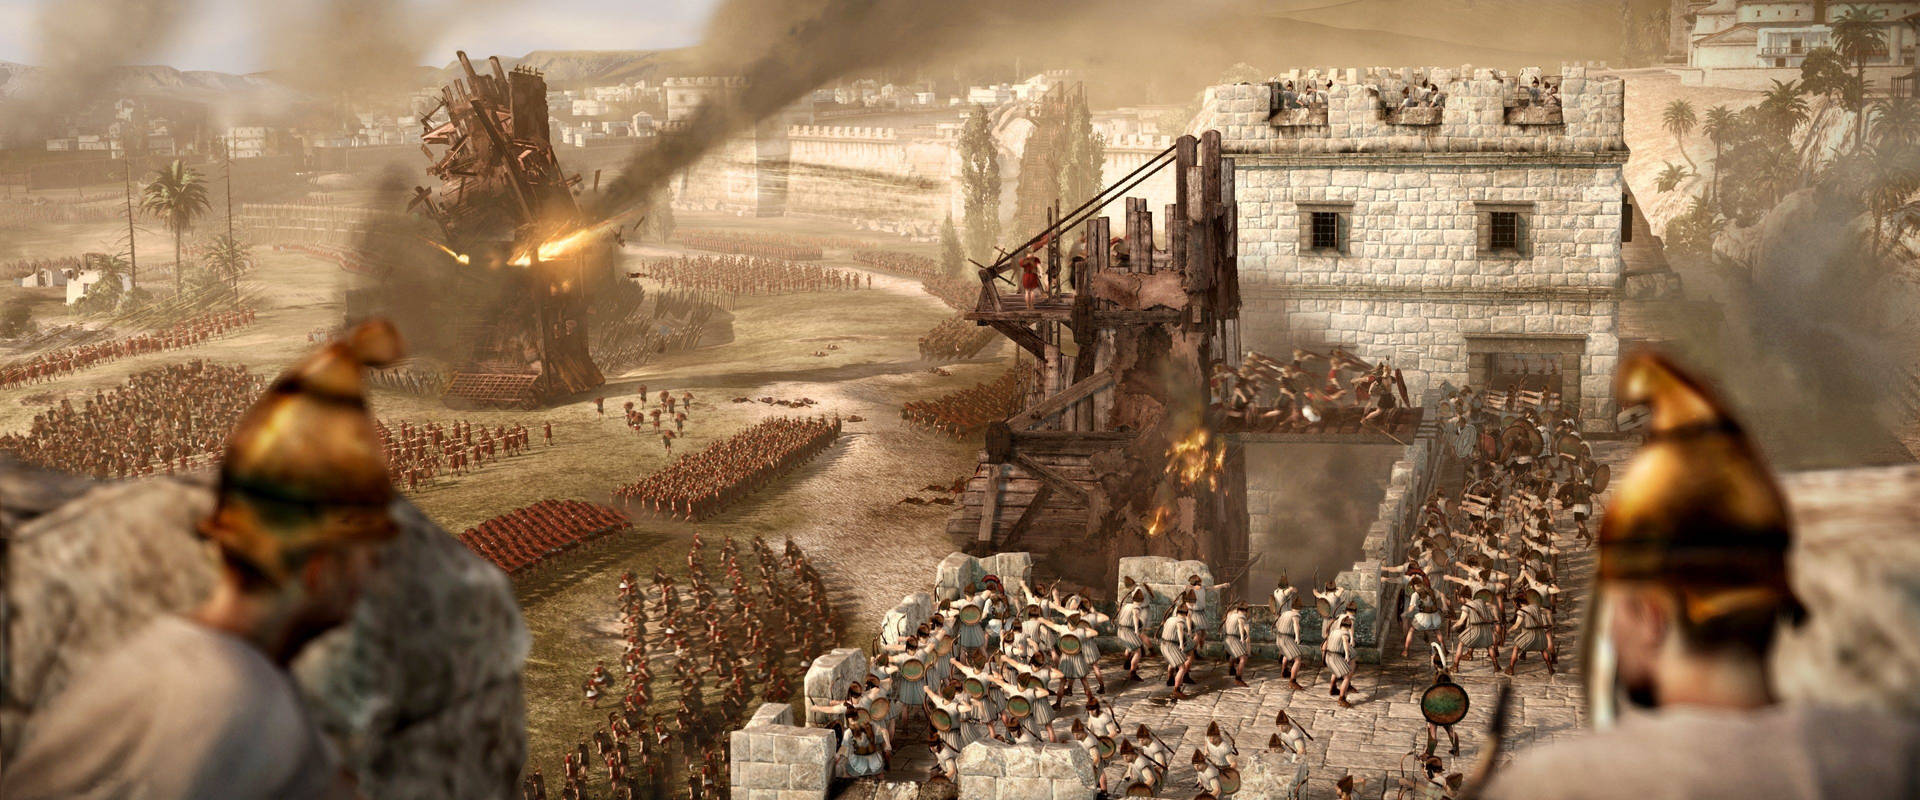 Experience War and Share the Glory of Rome in Total War Wallpaper